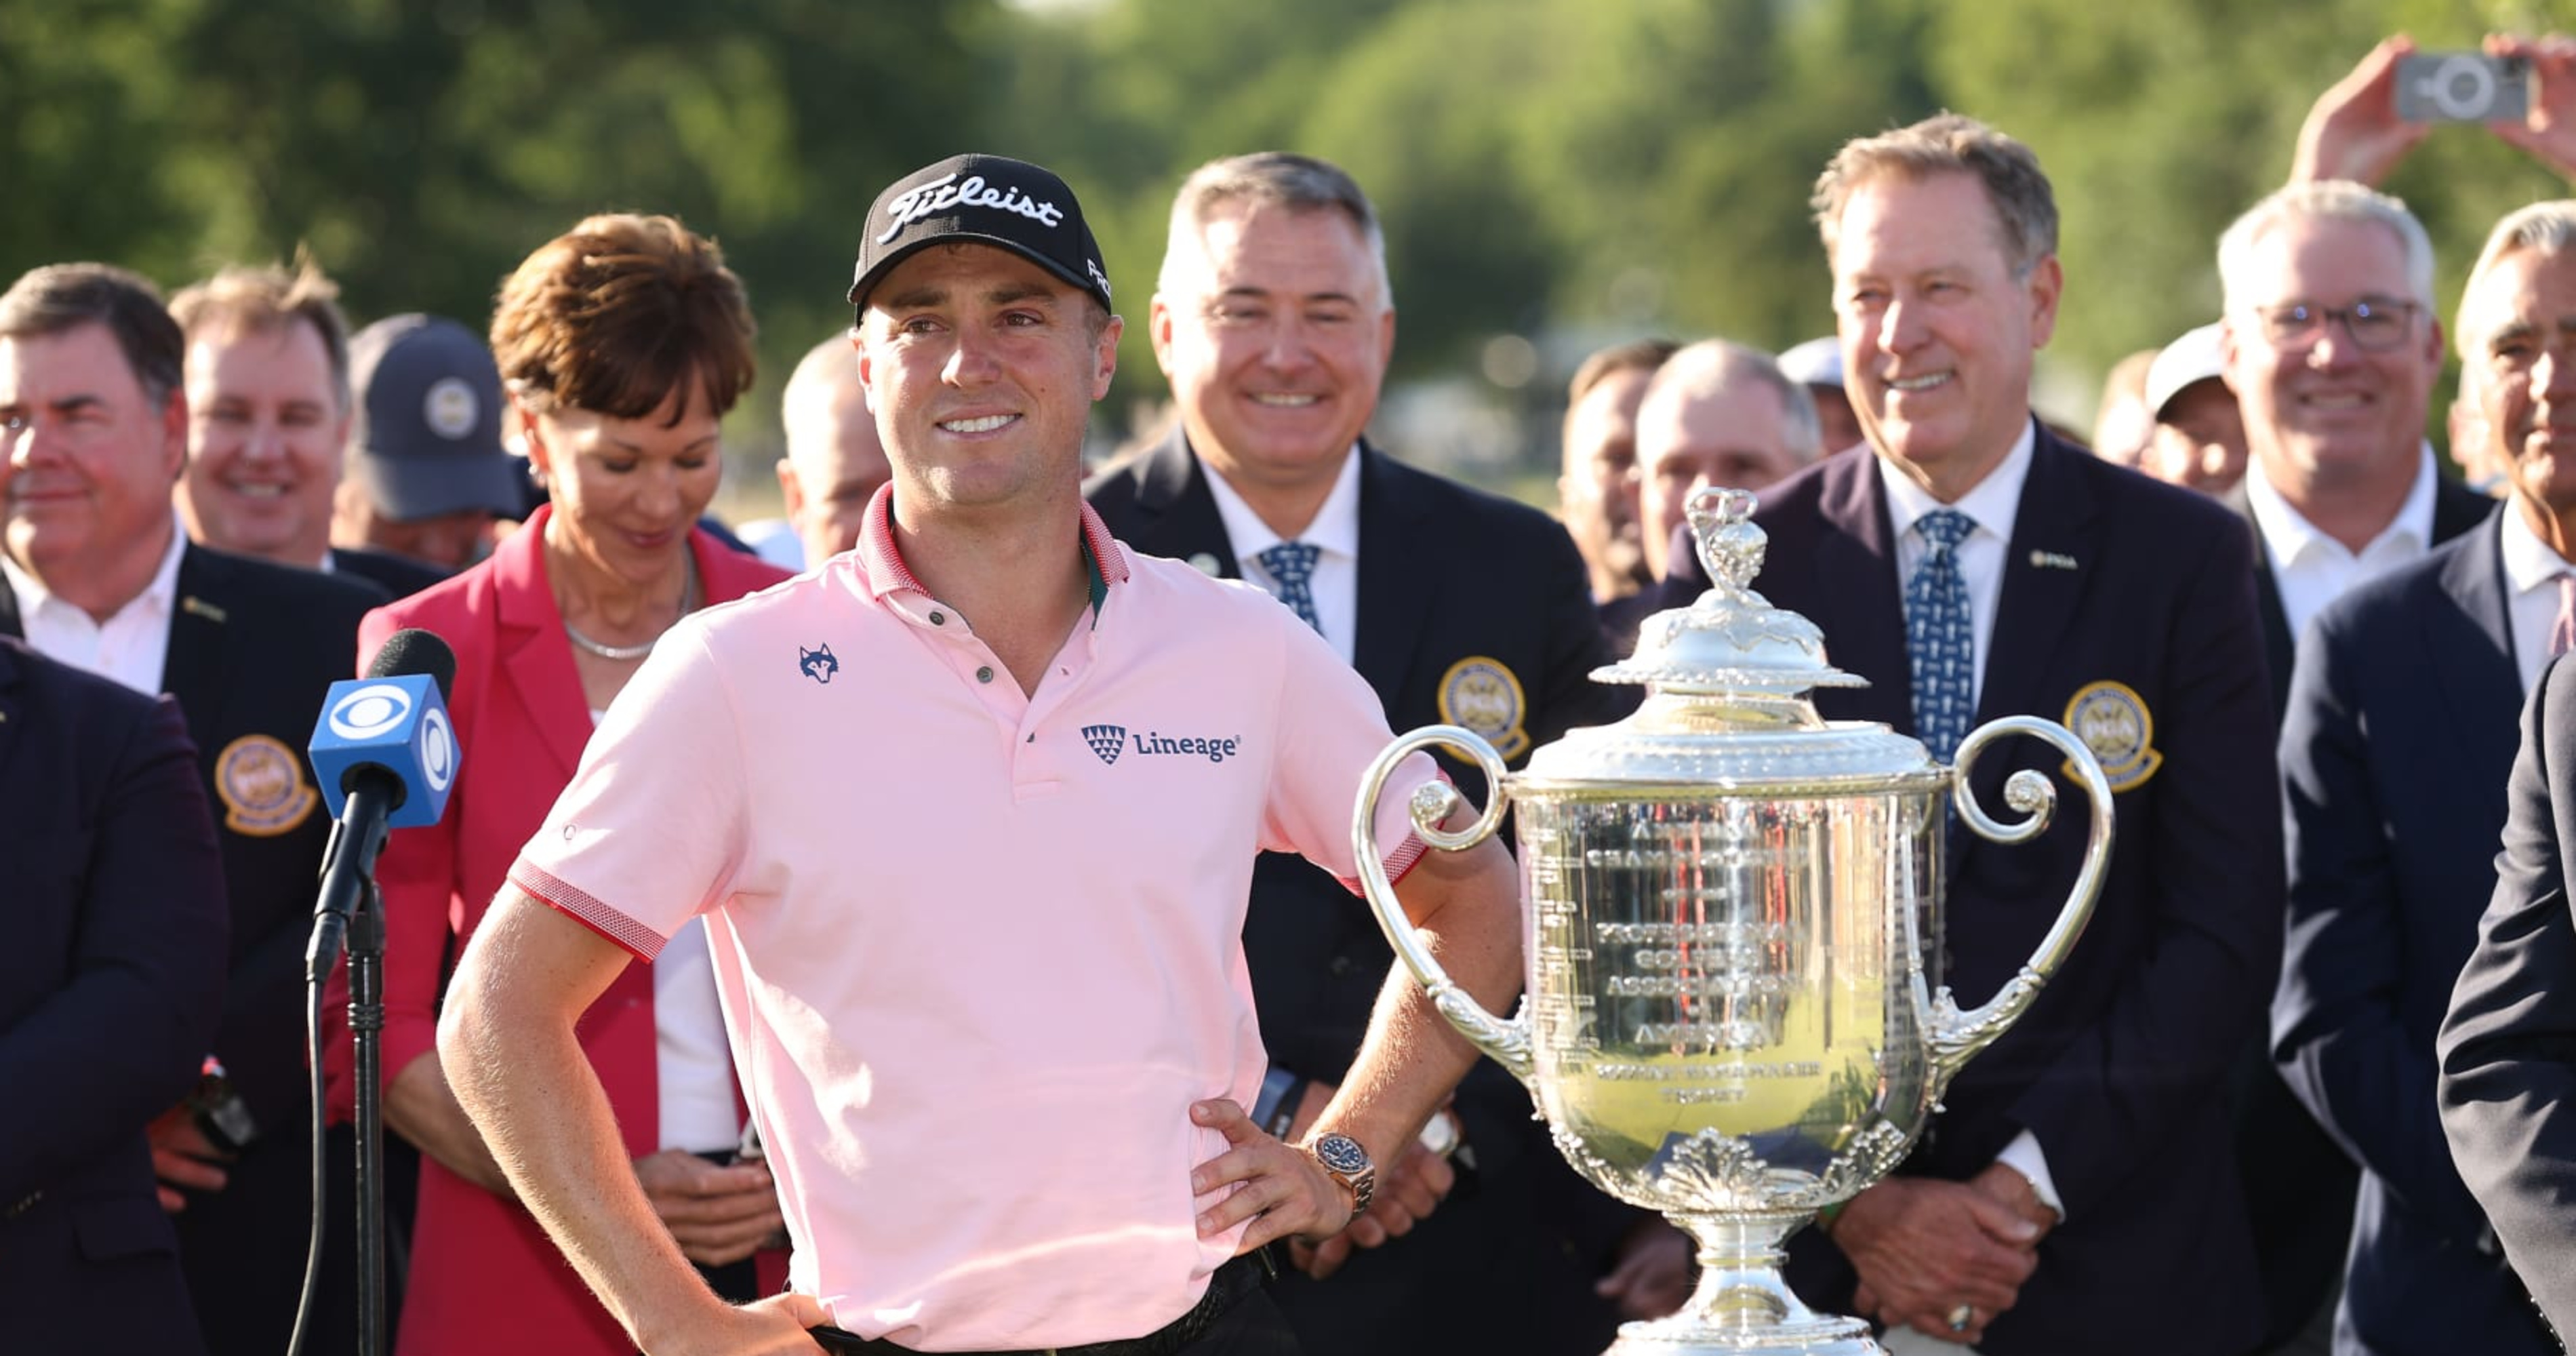 PGA Championship 2023 Tee Times Pairings Announced for 1st, 2nd Rounds